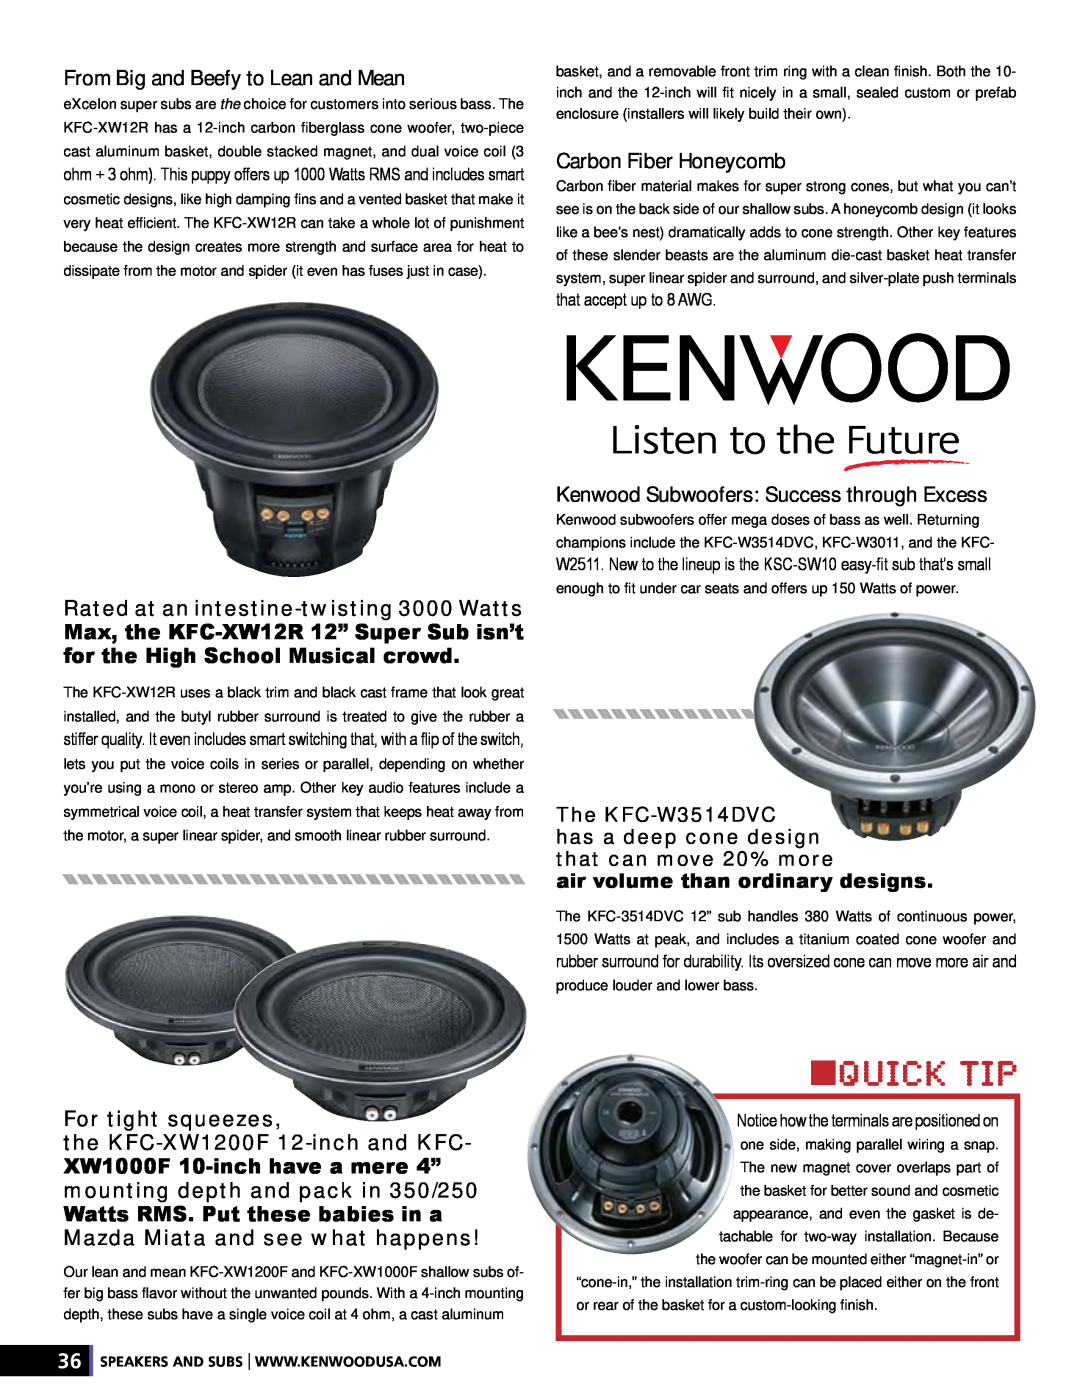 Kenwood XR-S17P From Big and Beefy to Lean and Mean, Carbon Fiber Honeycomb, Kenwood Subwoofers: Success through Excess 